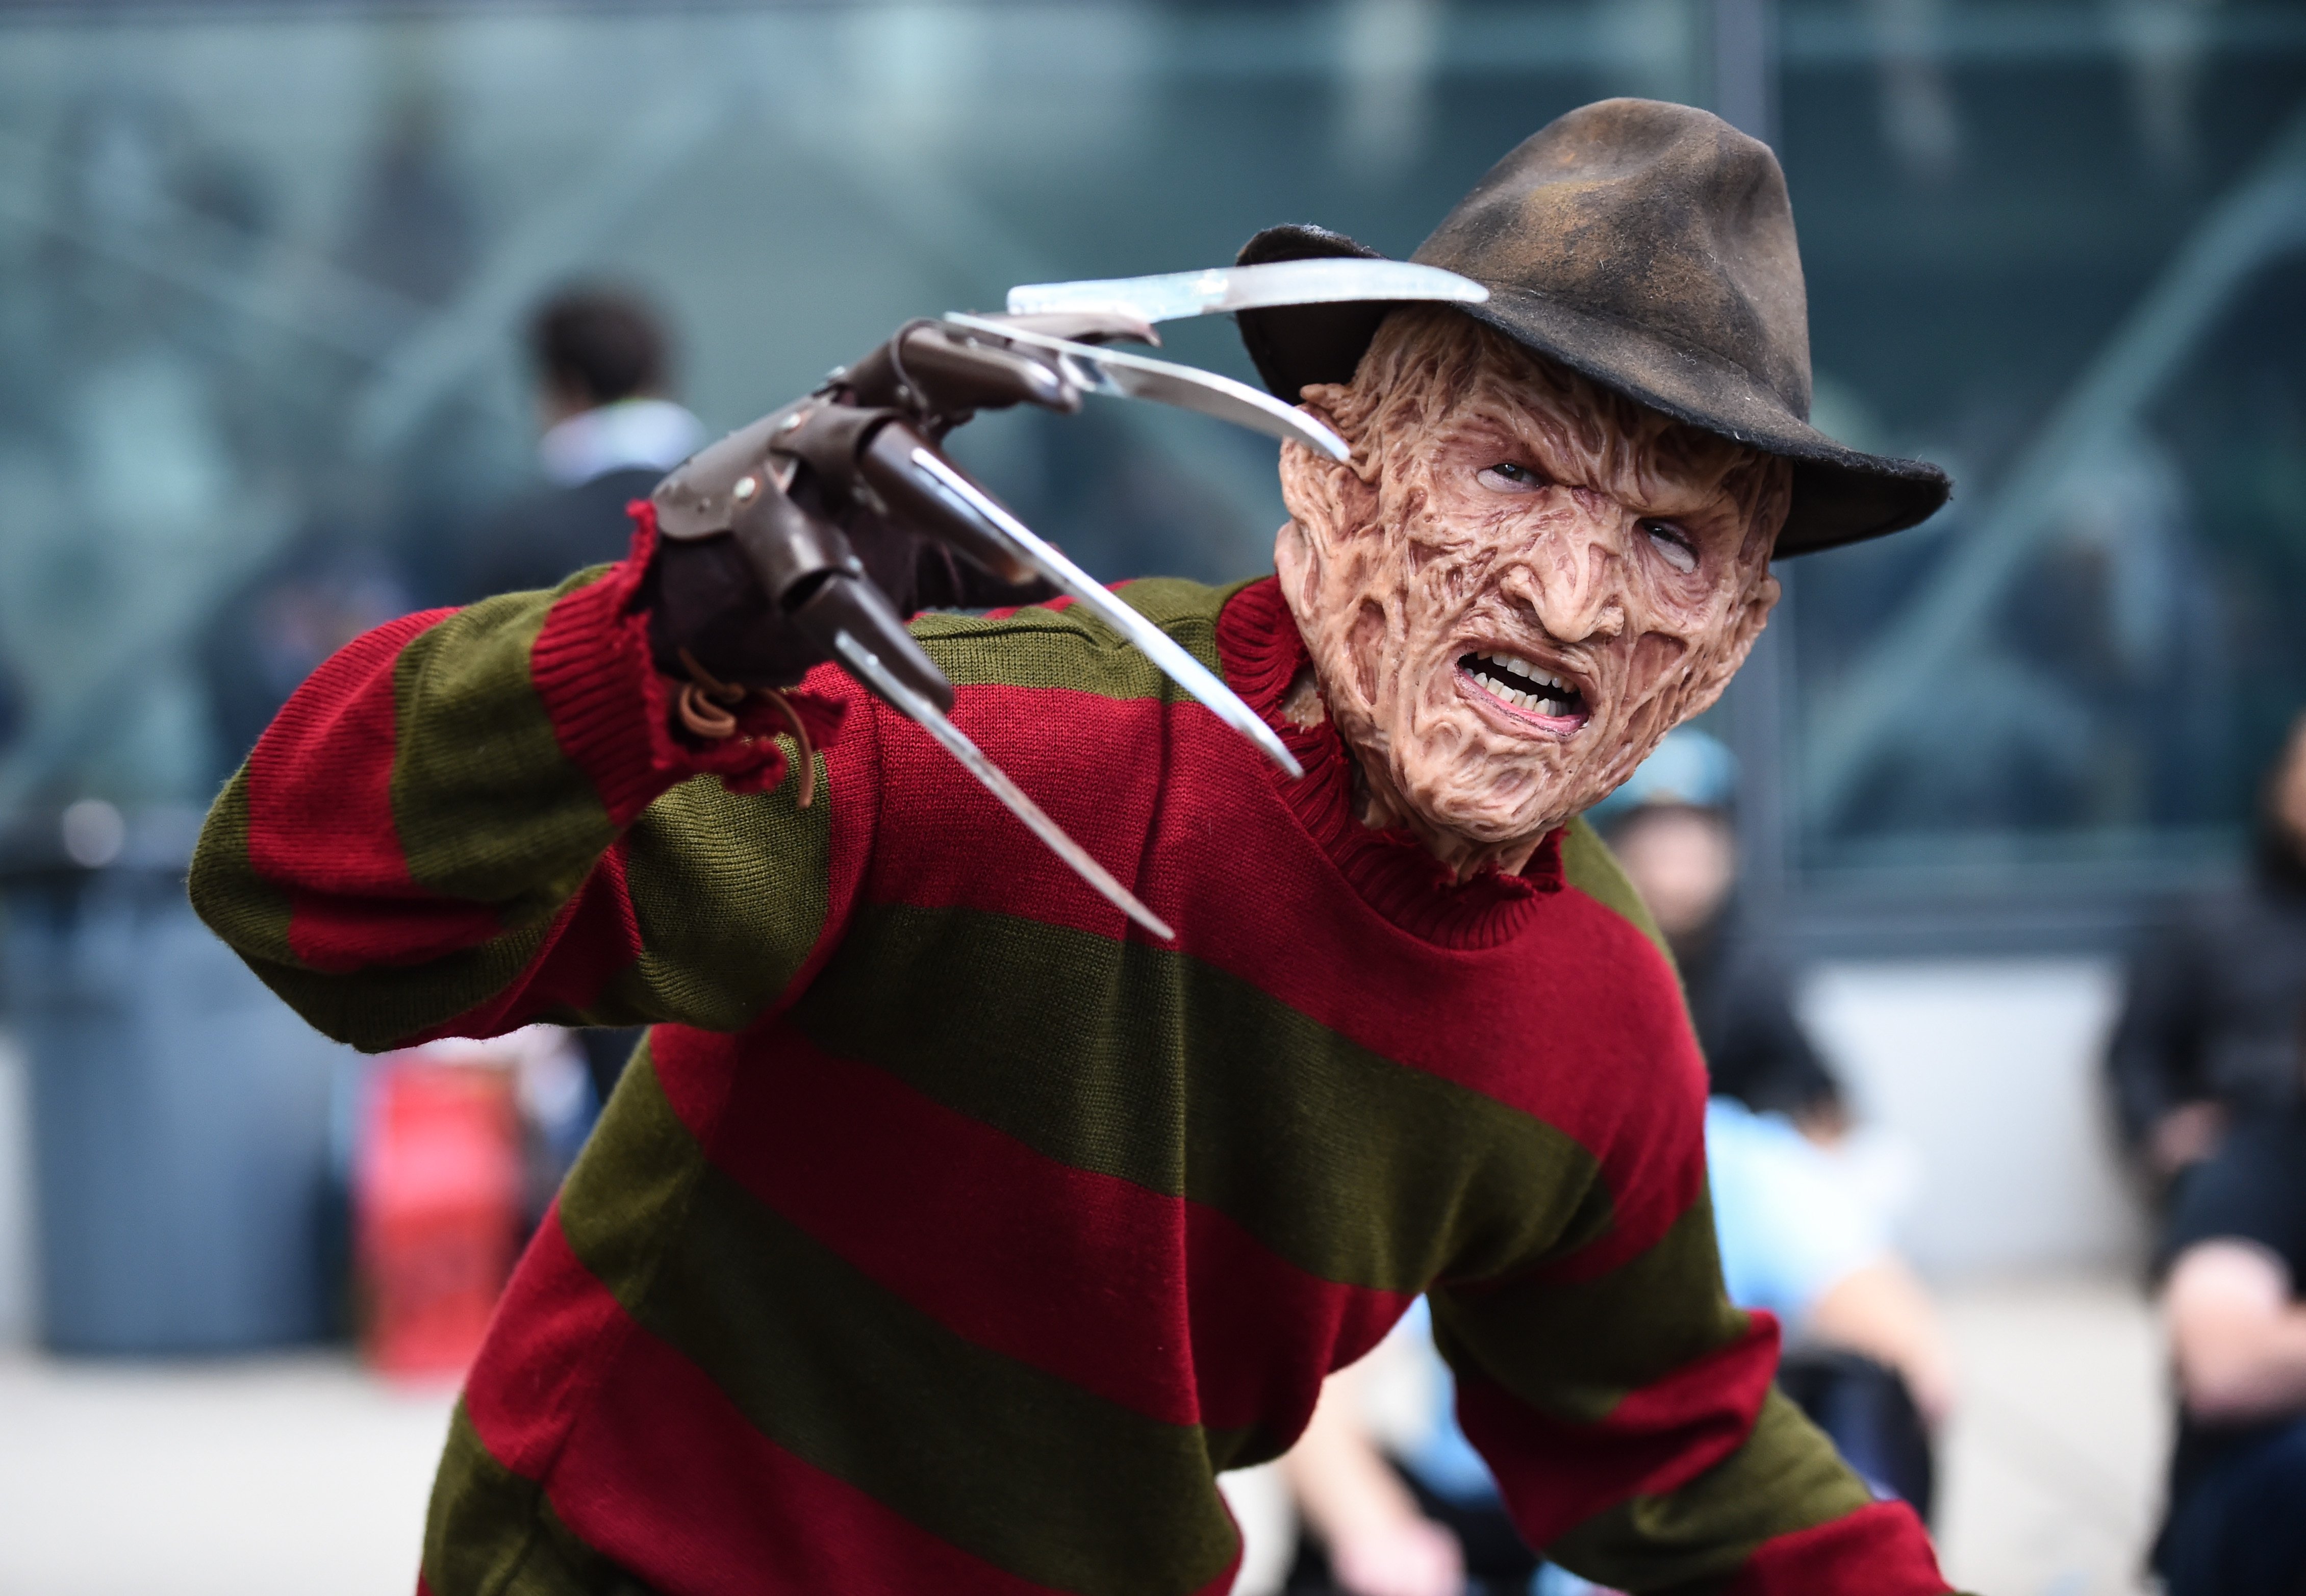 How a Cat Inspired Freddy Krueger From &#39;A Nightmare on Elm Street&#39;